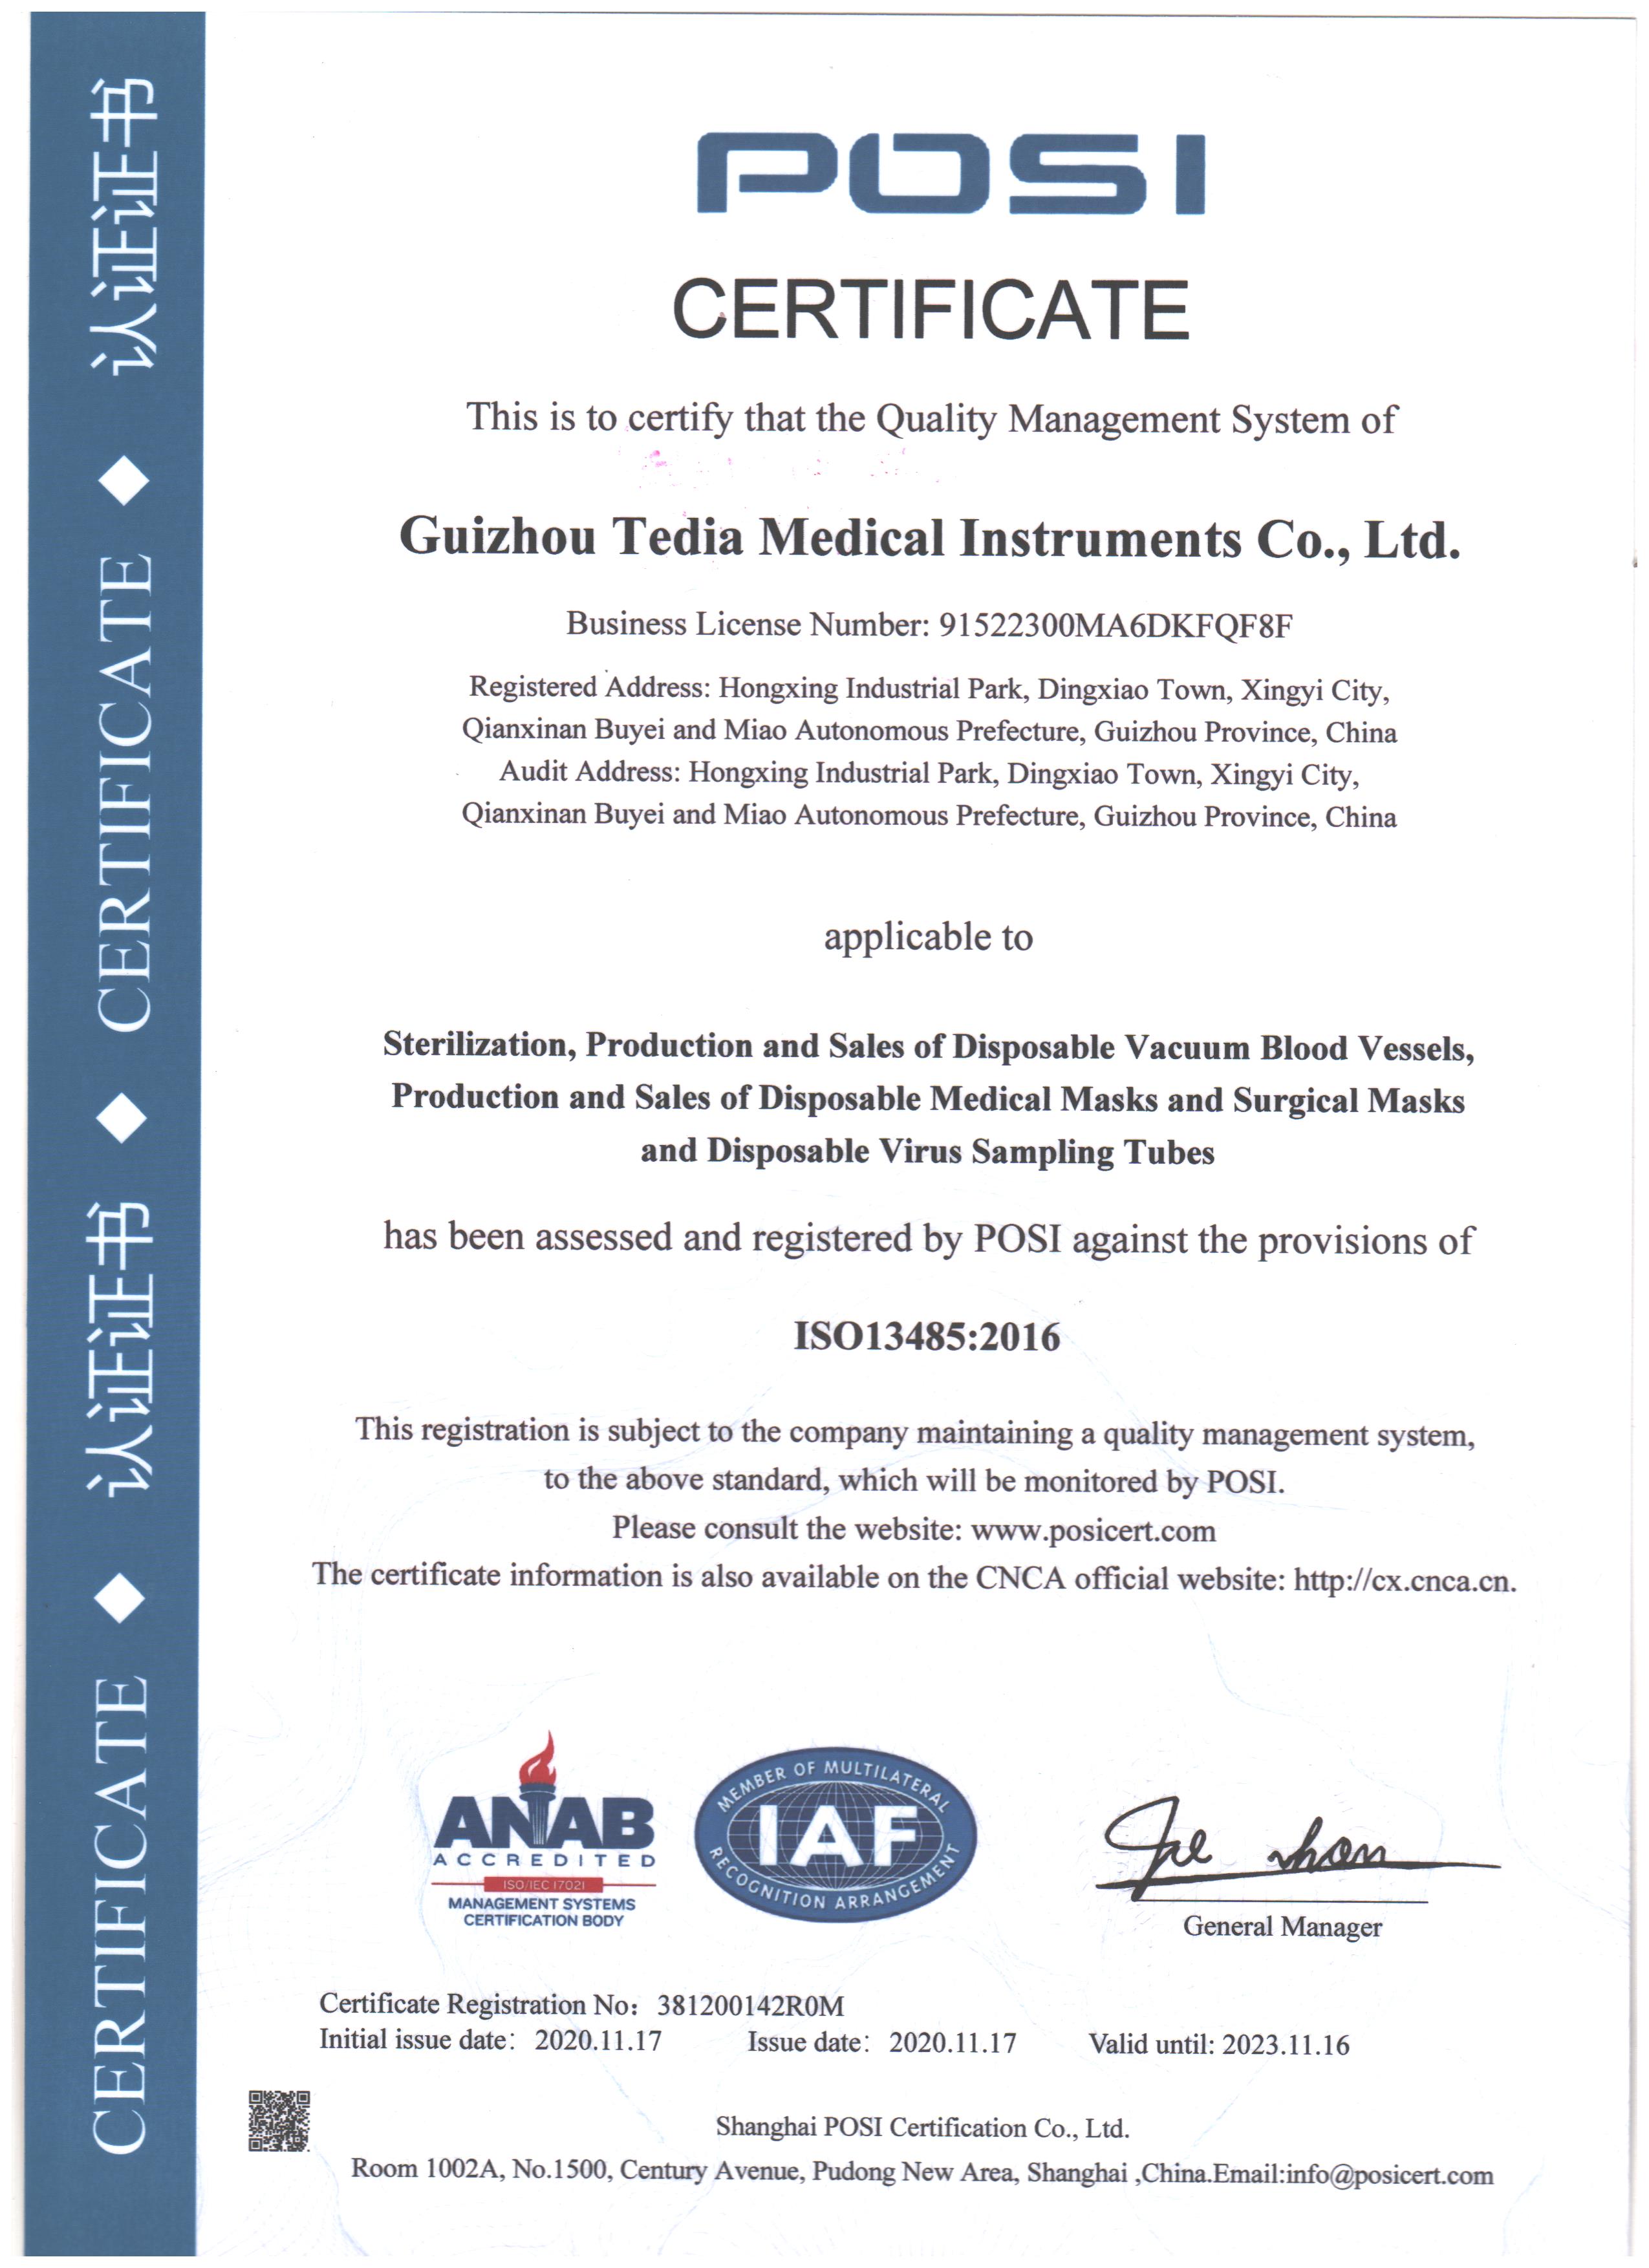 ISO13485 quality management system certification